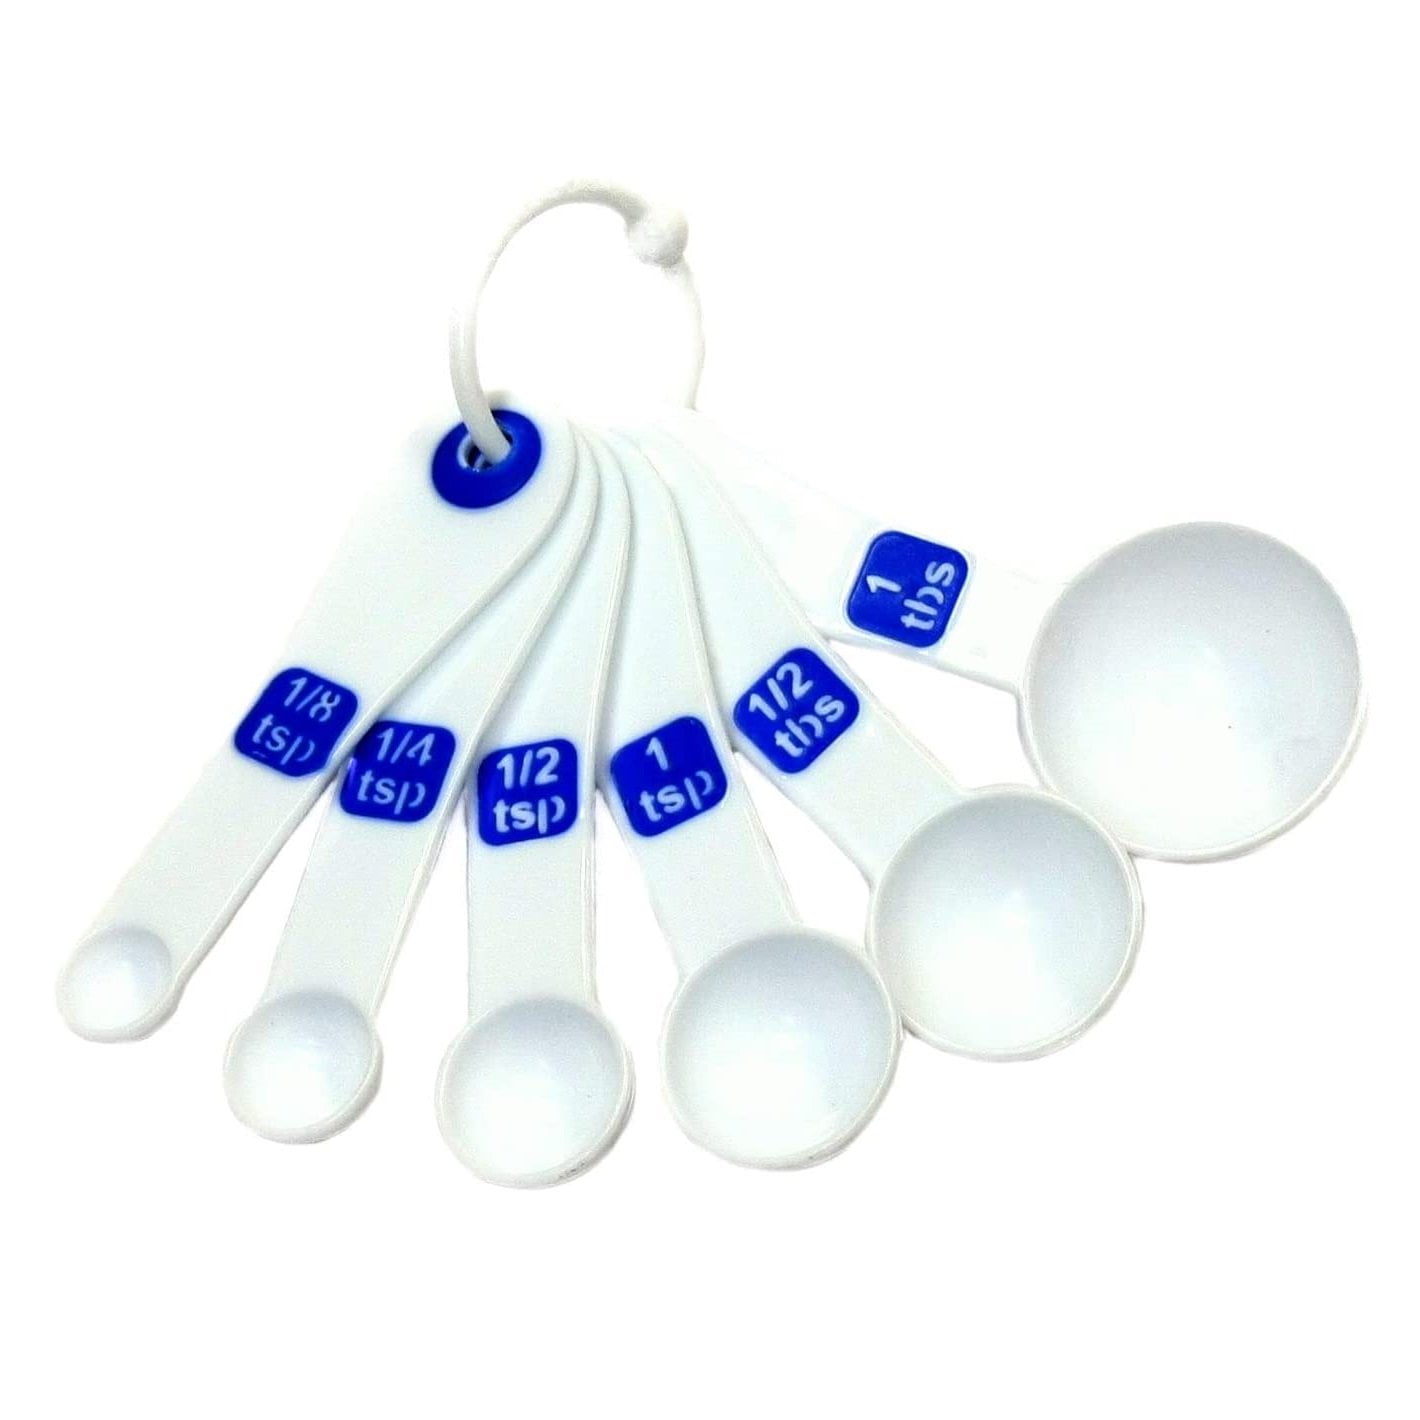 Chef Craft Easy to Read Plastic, Measuring Cup Set, 10 piece set, Blue